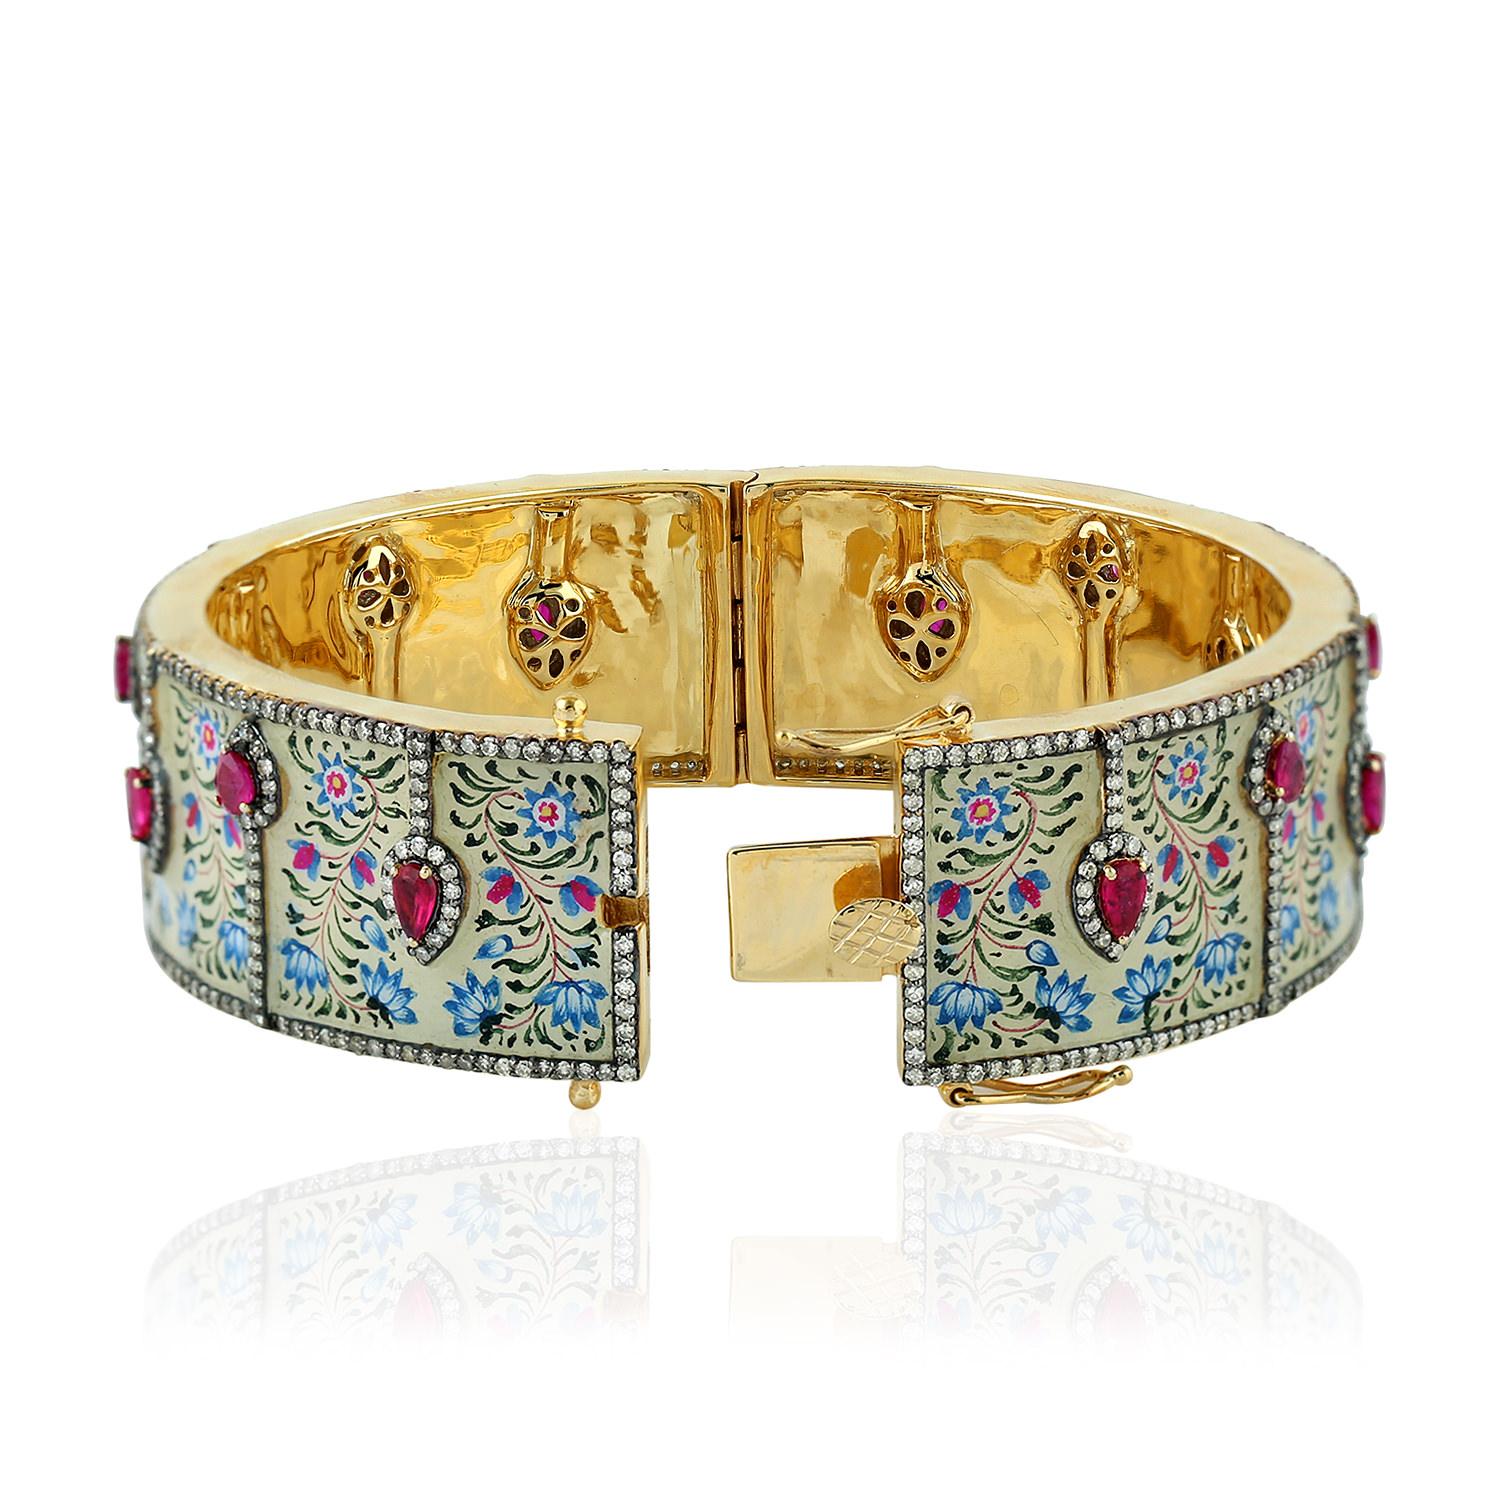 This Maharaja bangle bracelet features unique hand painted miniature art set with 18K gold and sterling silver.  It is set with 2.45 carats rubies and 4.18 carats of sparkling diamonds. Clasp closure.

FOLLOW  MEGHNA JEWELS storefront to view the